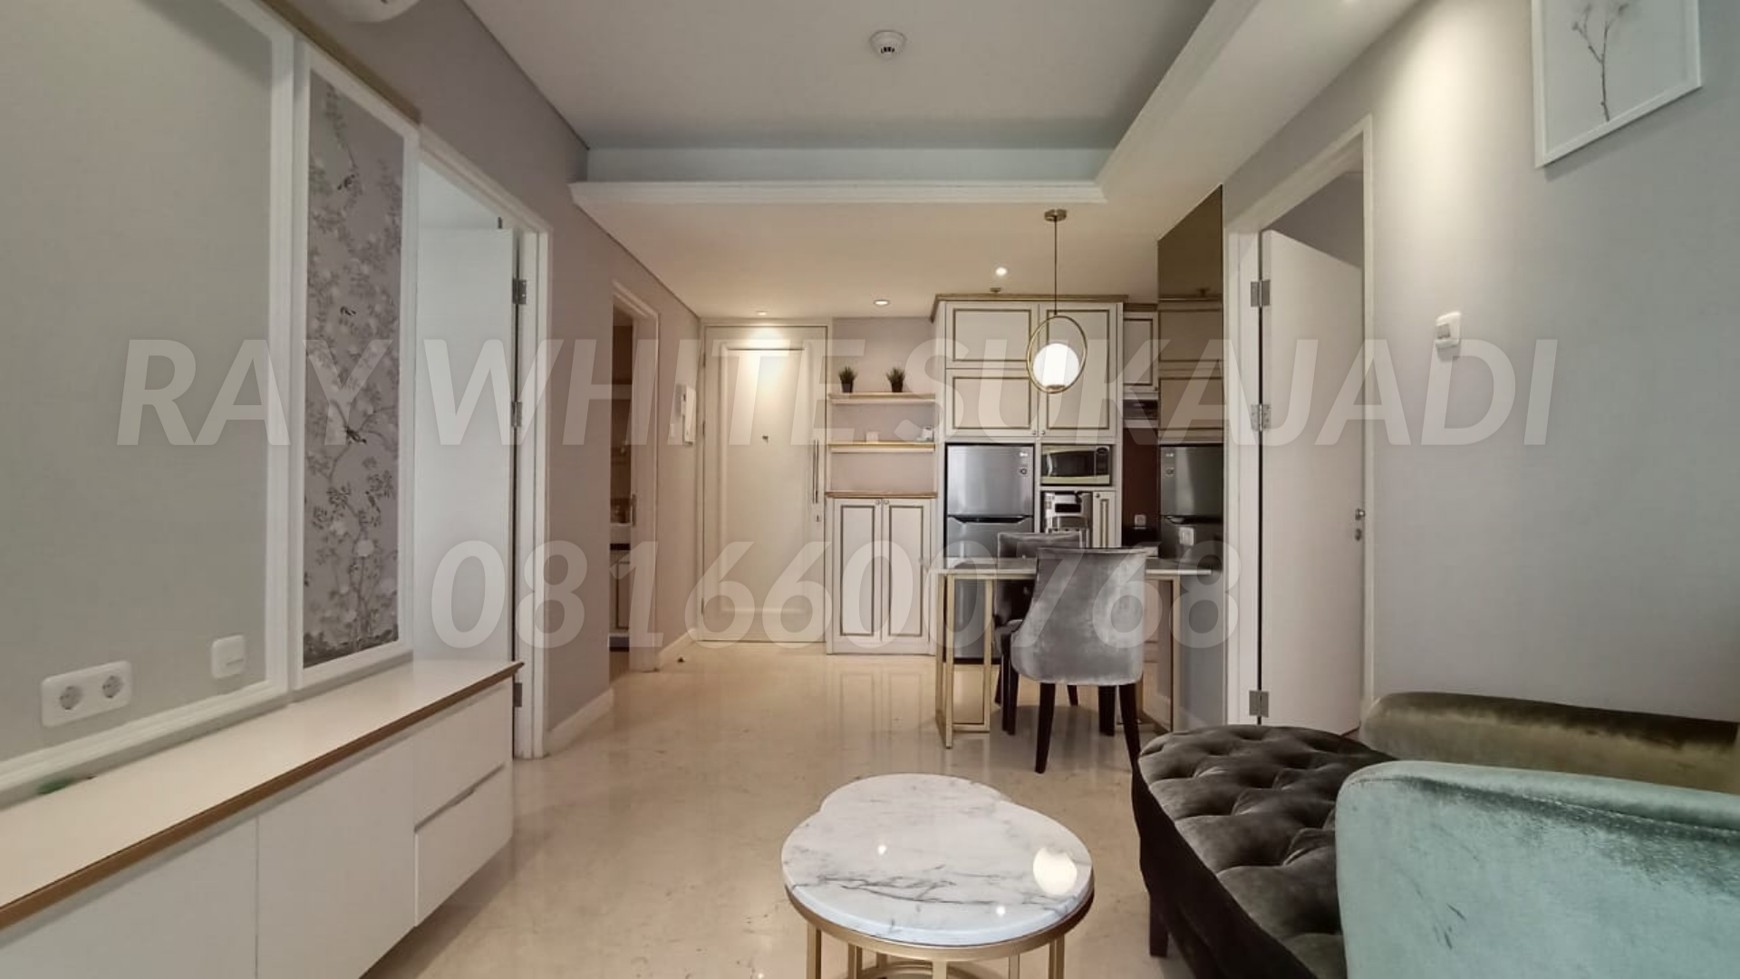 APARTMENT LUX FURNISHED - LANDMARK RESIDENCE TOWER B LT.5 - 2BR